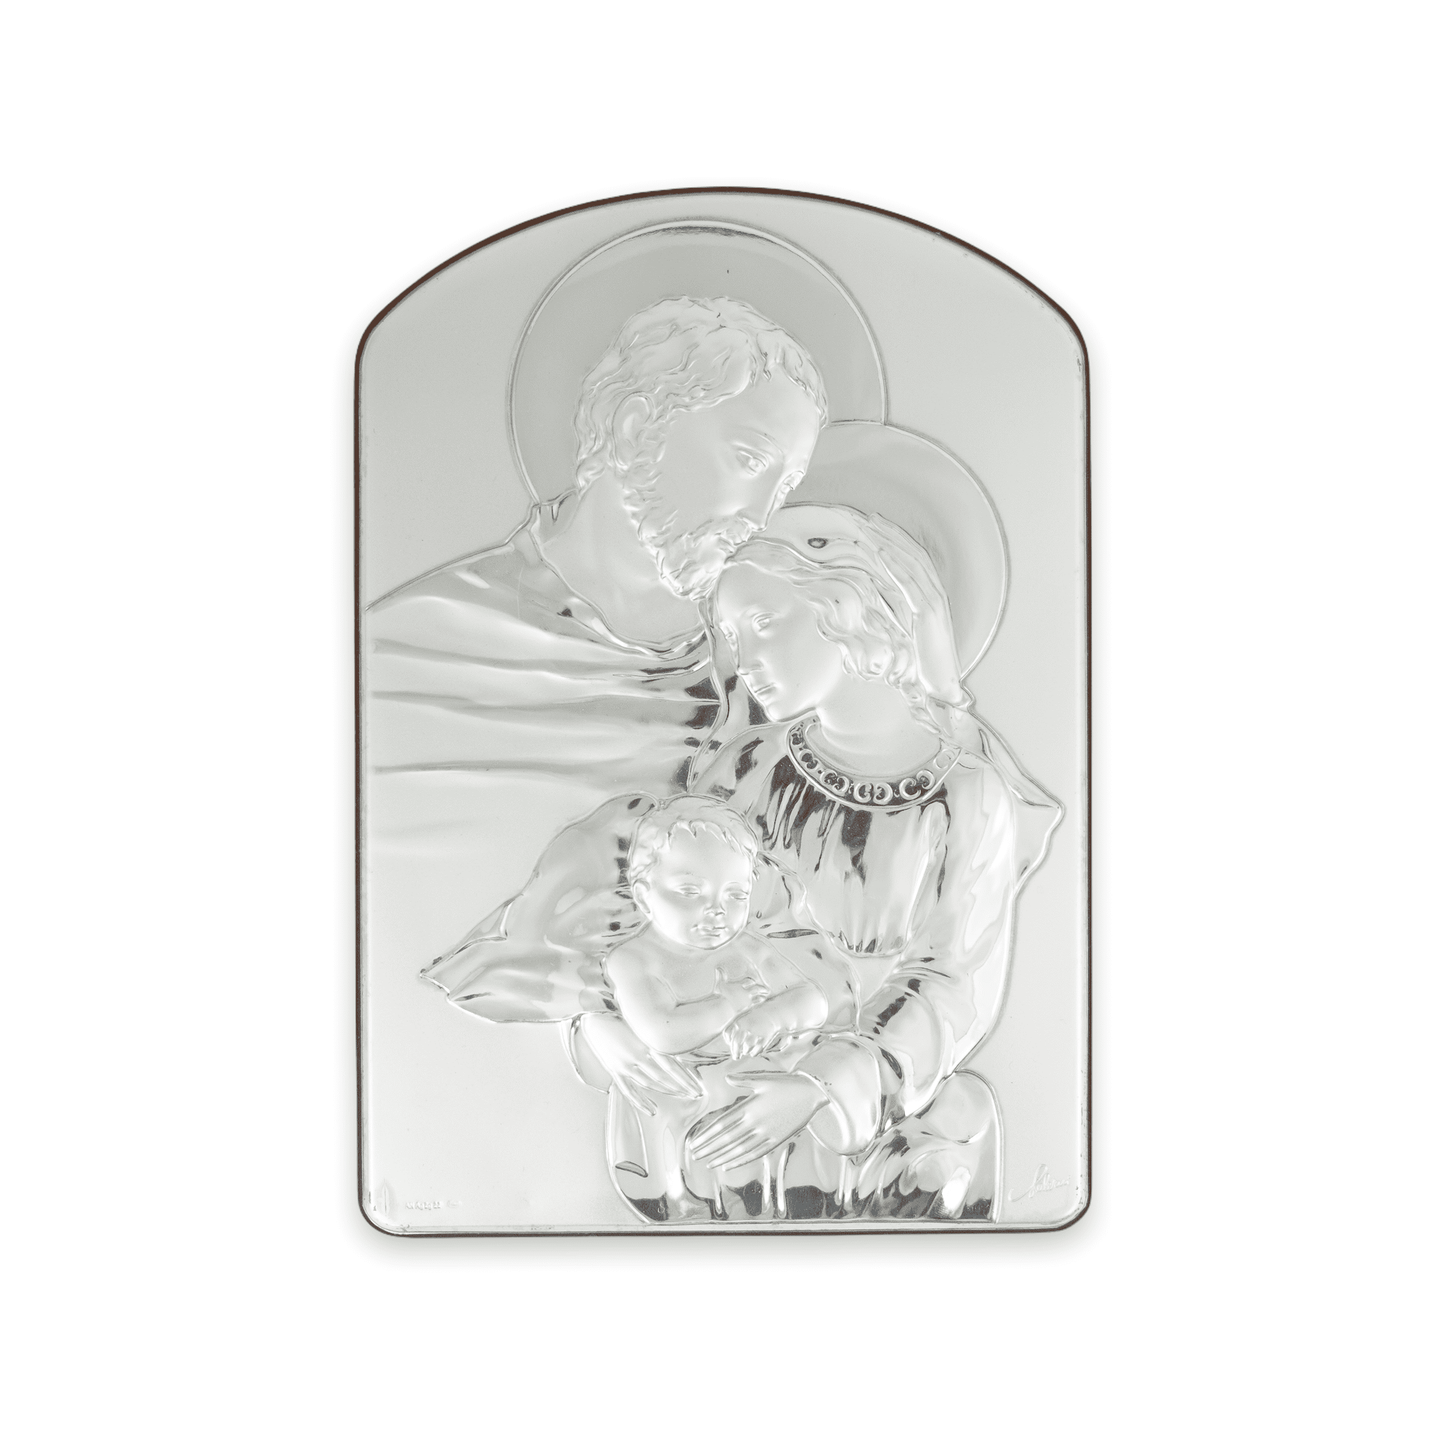 MONDO CATTOLICO 18X12 cm Holy Family Painting Sterling Silver Bilaminate